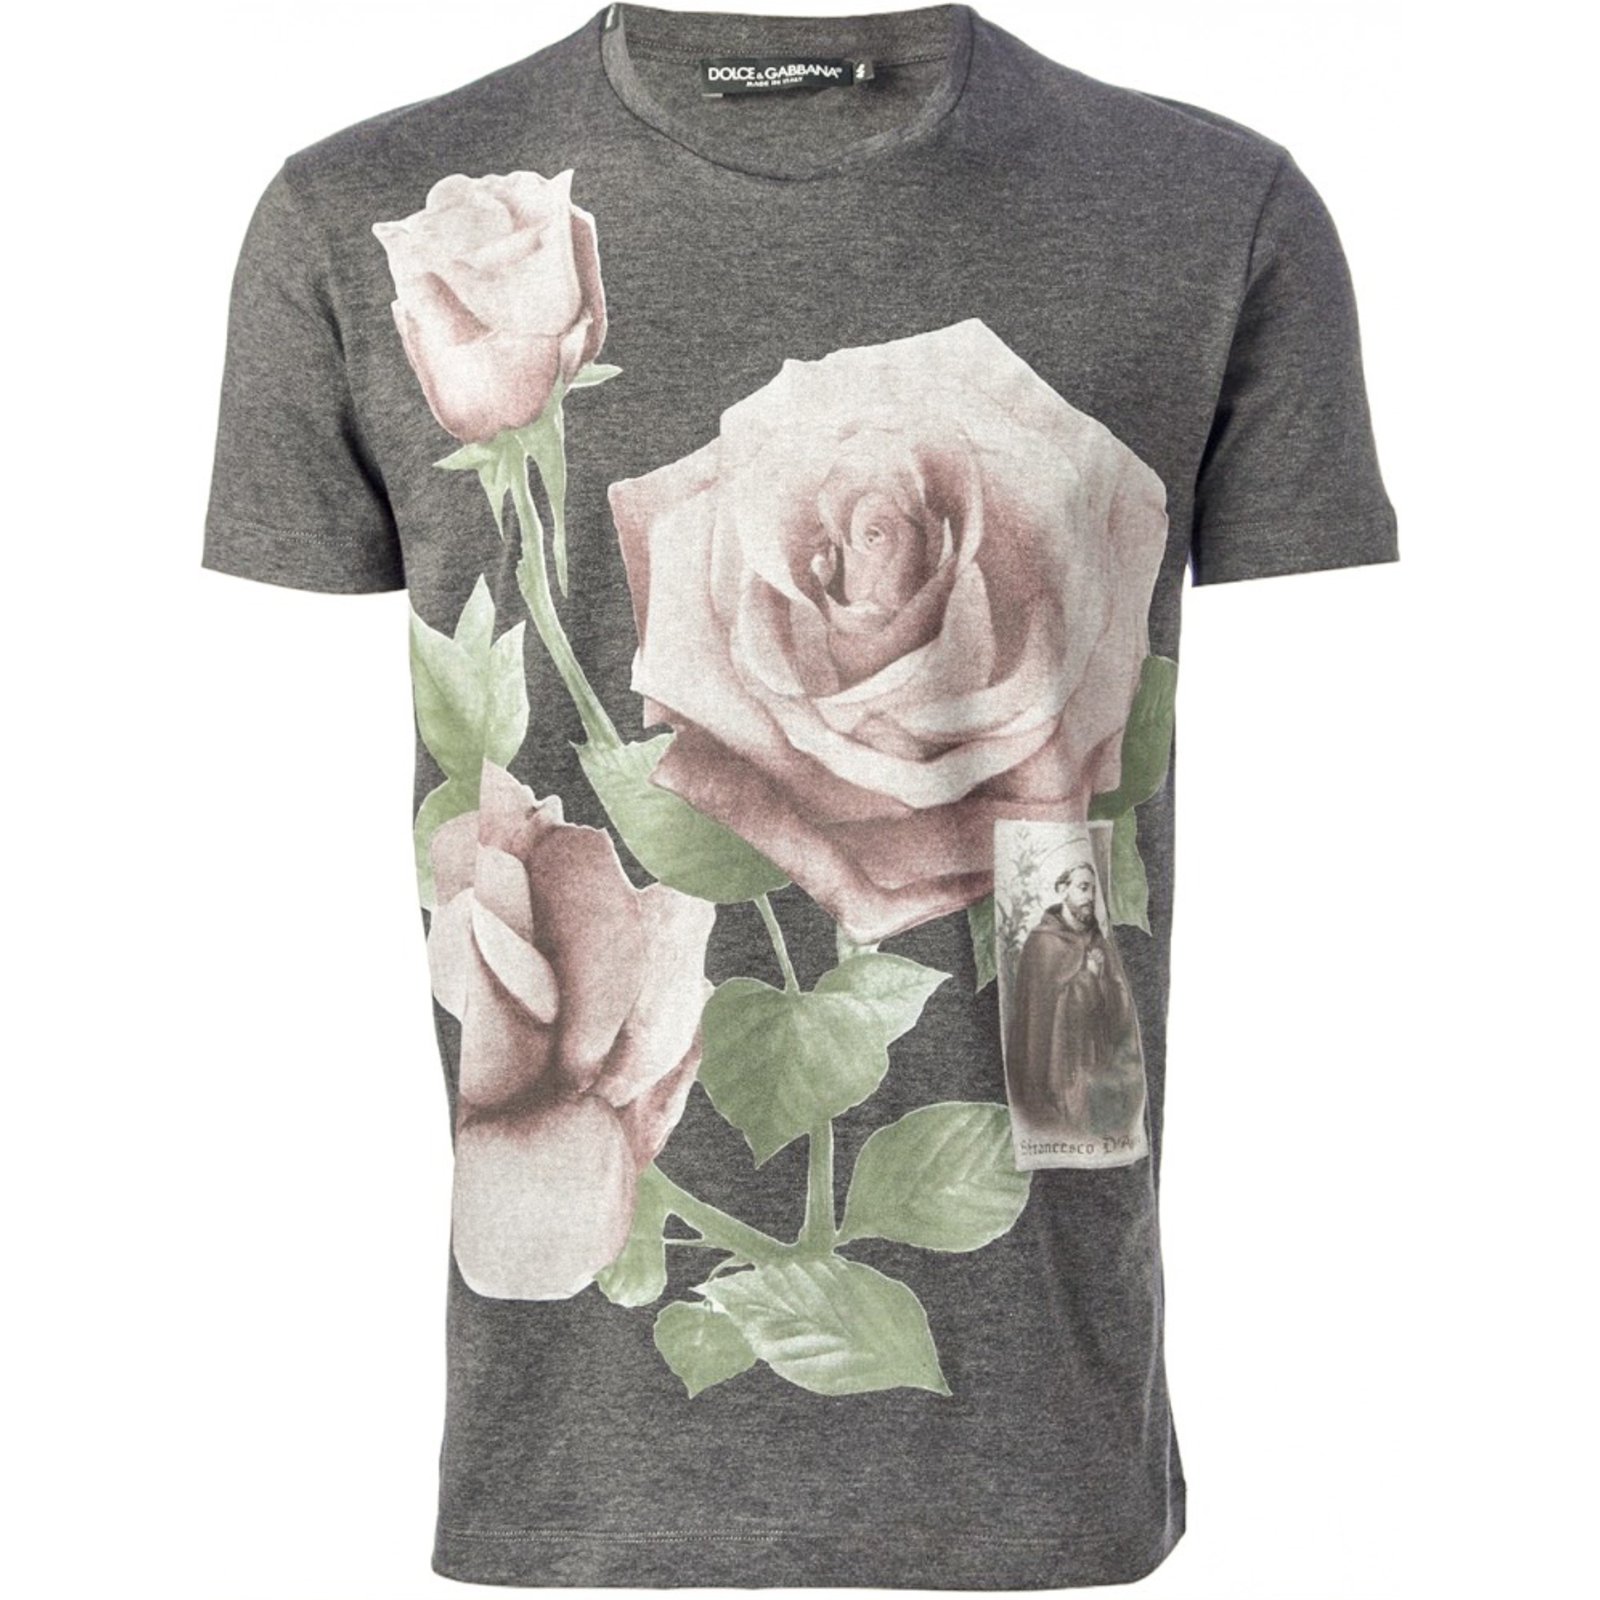 dolce and gabbana tees